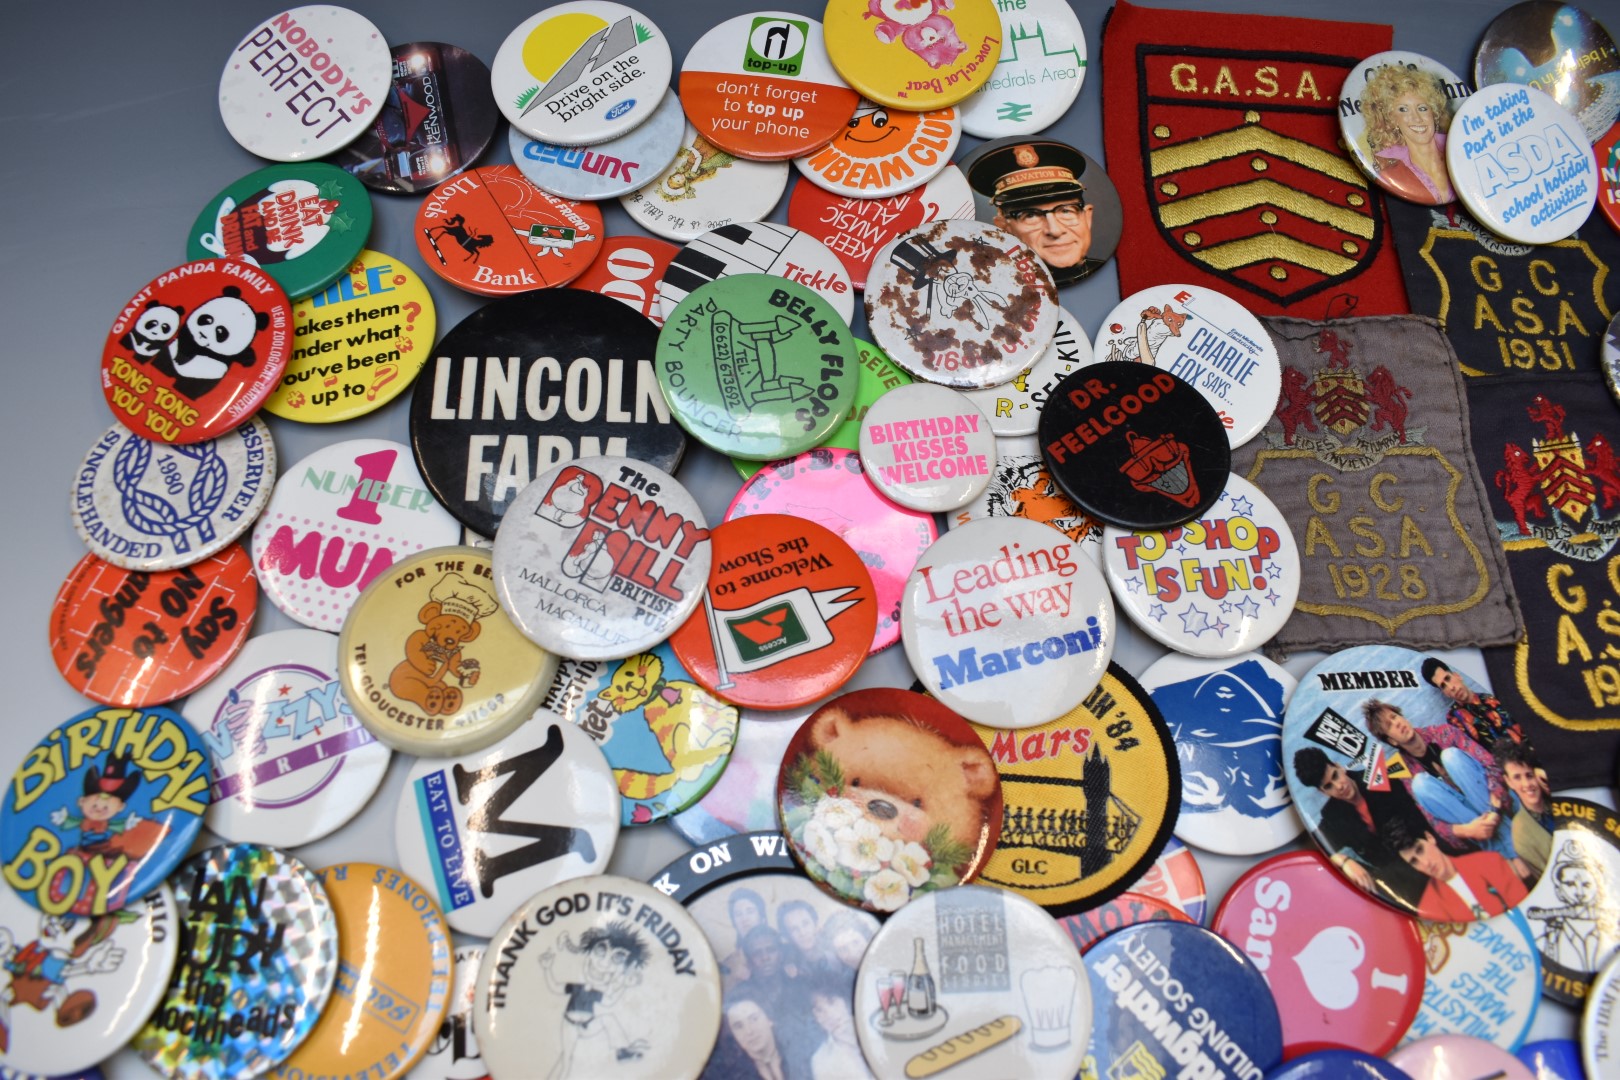 Over 1000 vintage and collectable badges including social history, advertising, humorous, slogans, - Image 4 of 9